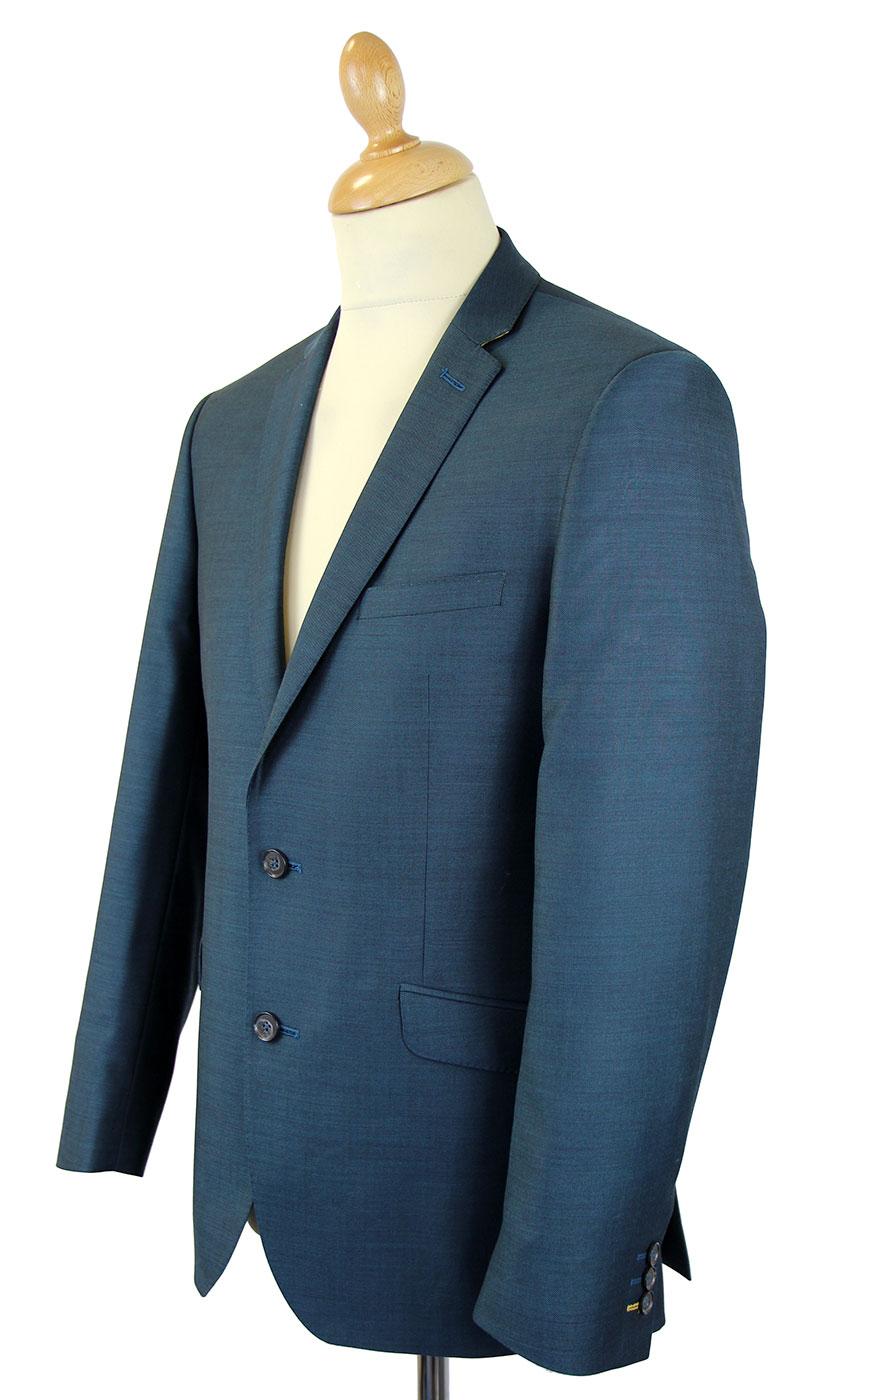 Mens Retro 60s style slim fit Mod Suit in Teal Tonic.